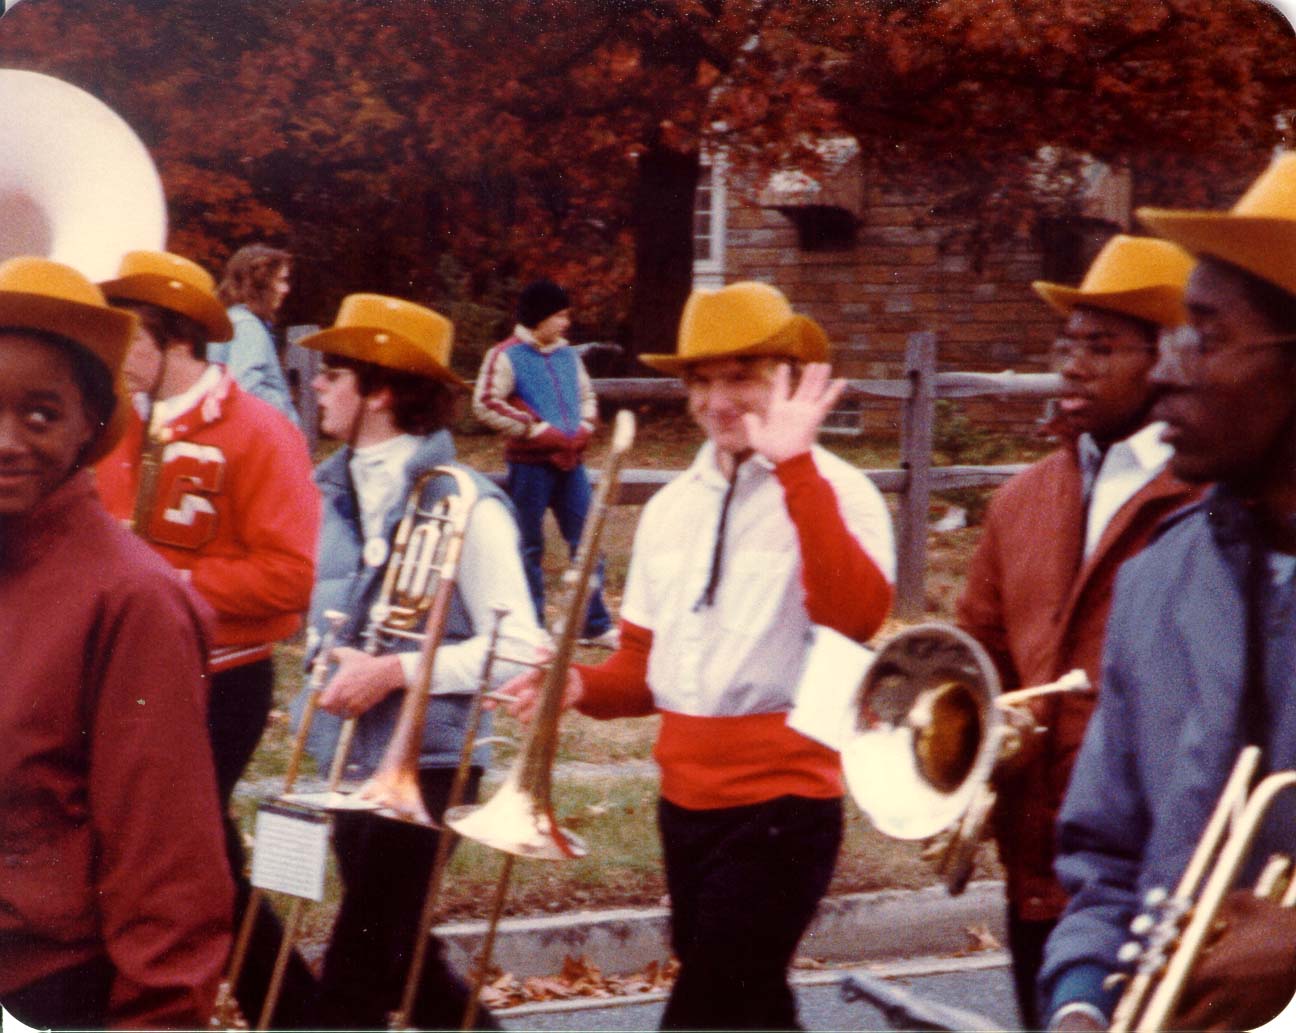 In the 1983 Homecoming Parade